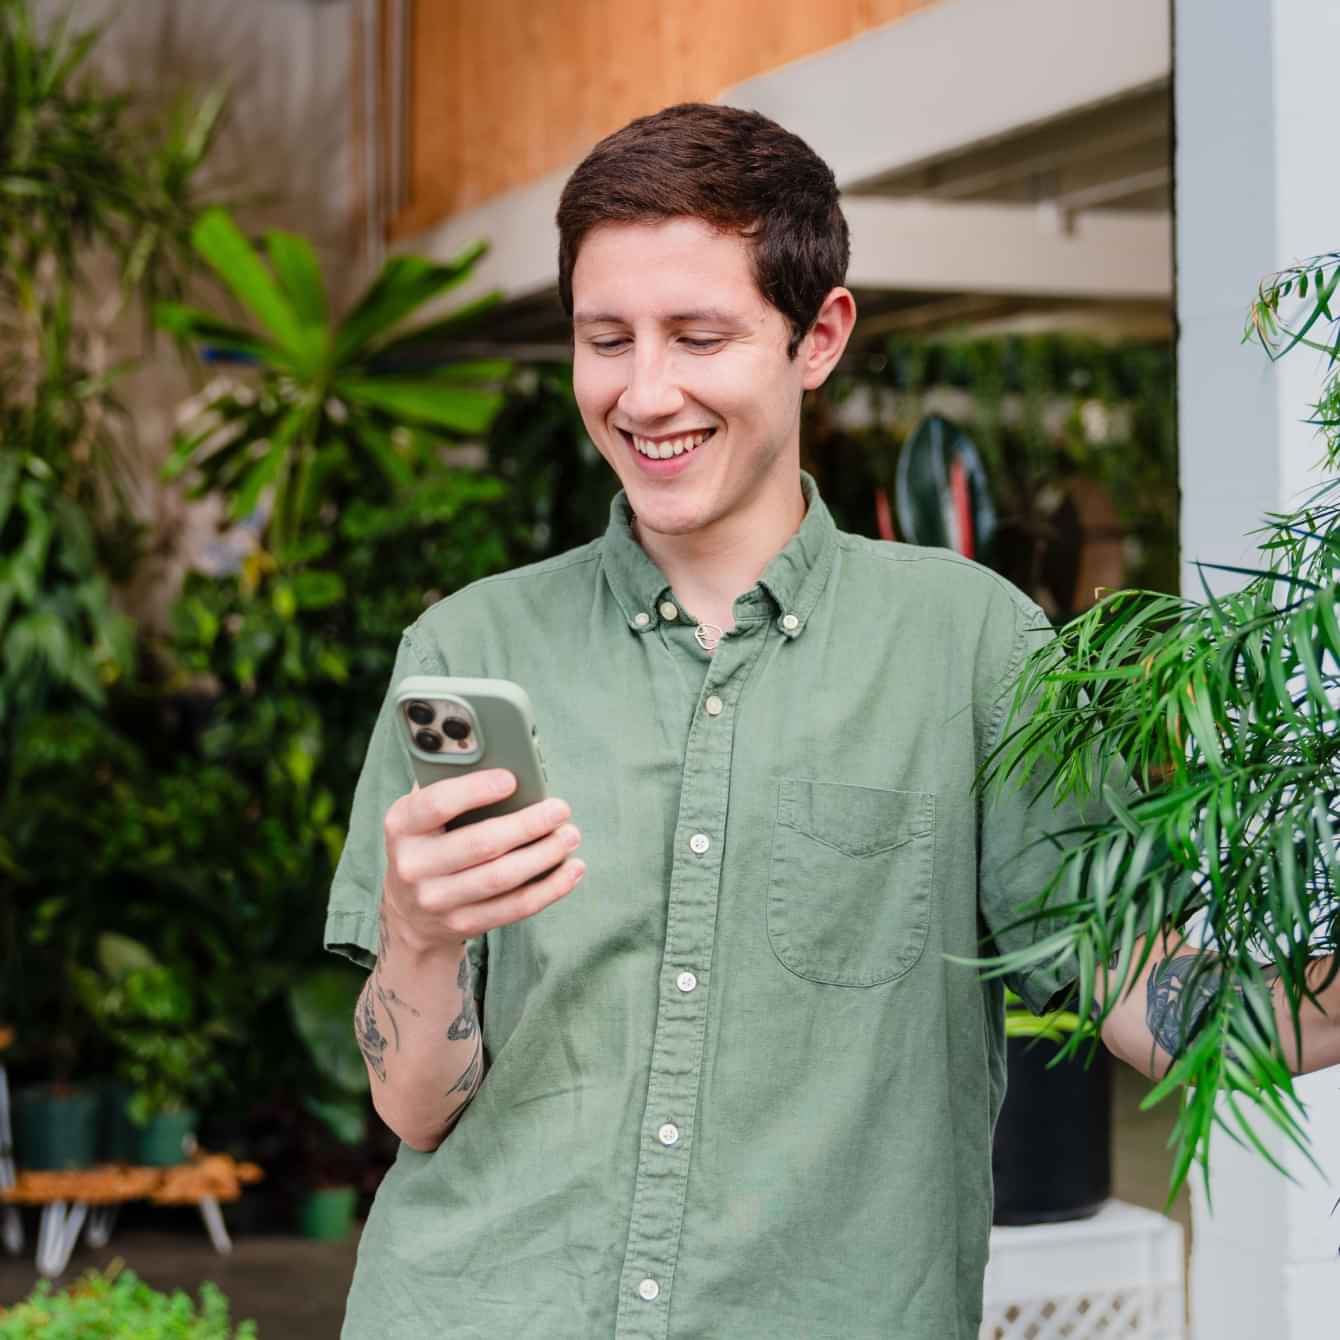 Plant store owner looking at his phone smiling